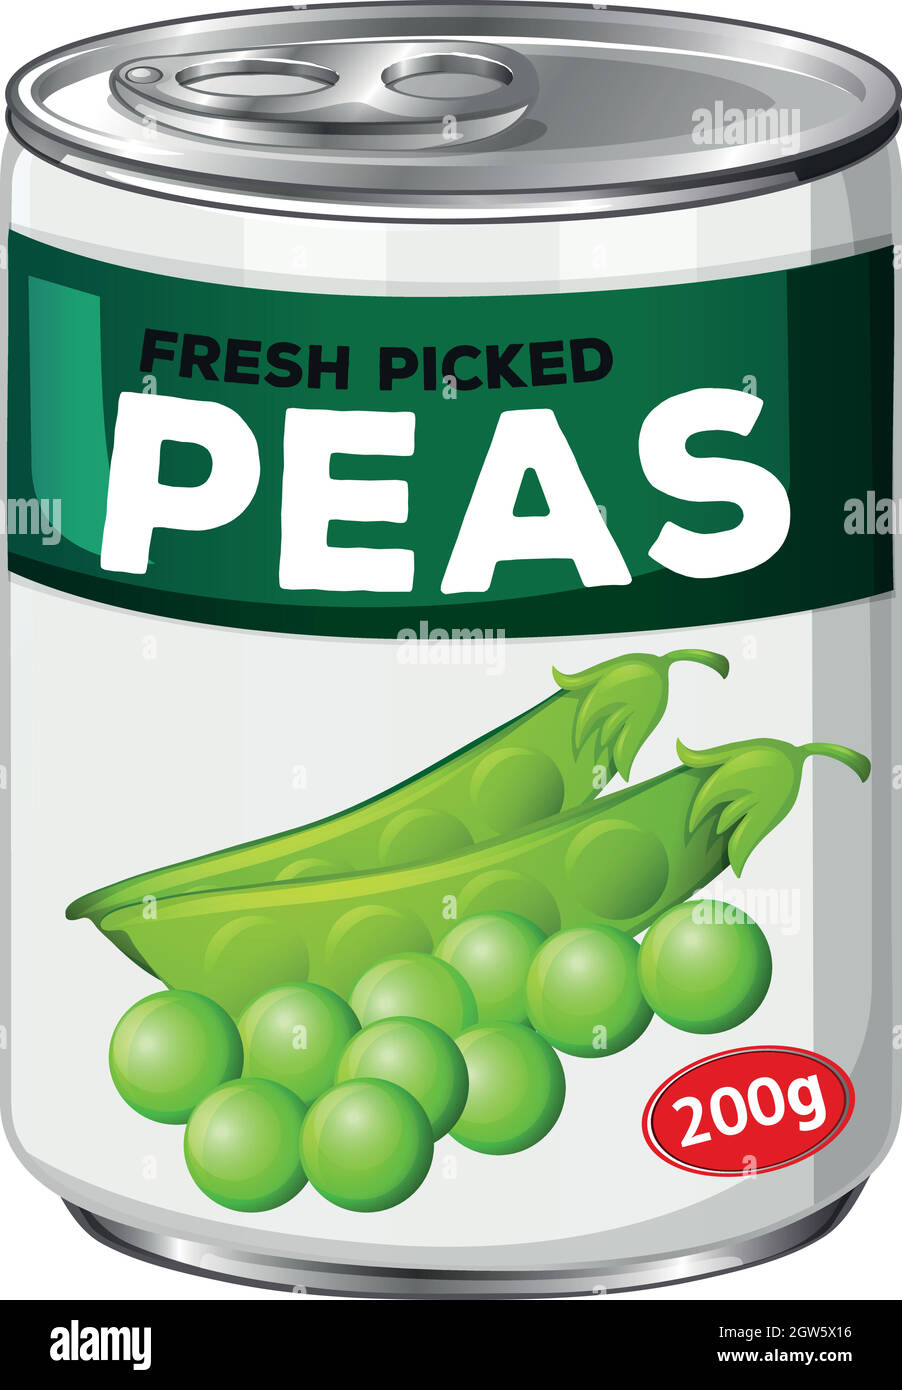 Can of fresh picked peas Stock Vector